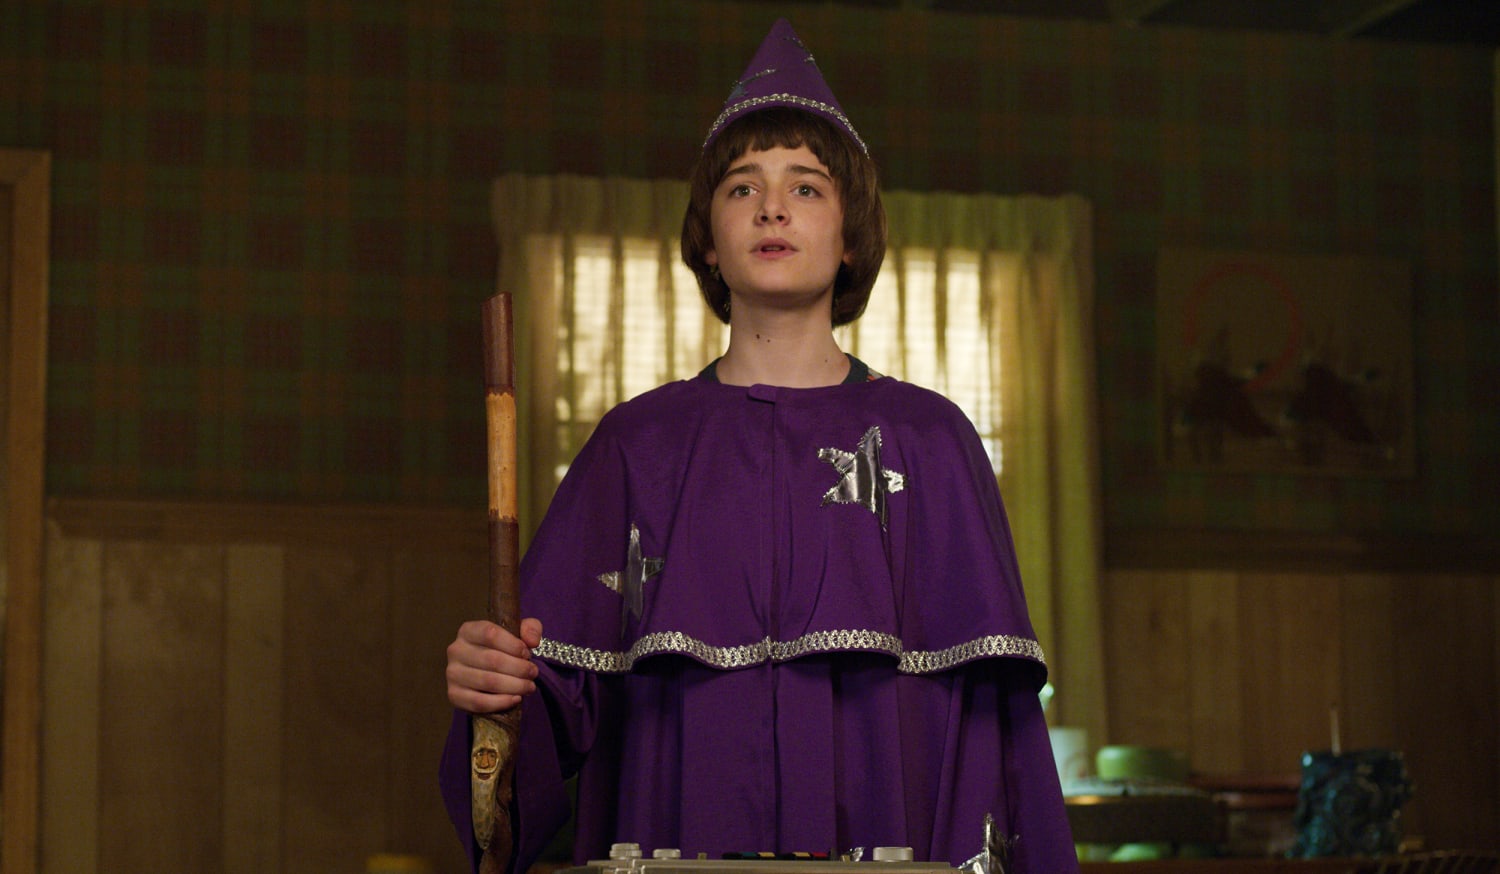 Stranger Things' star says character's sexuality 'up to